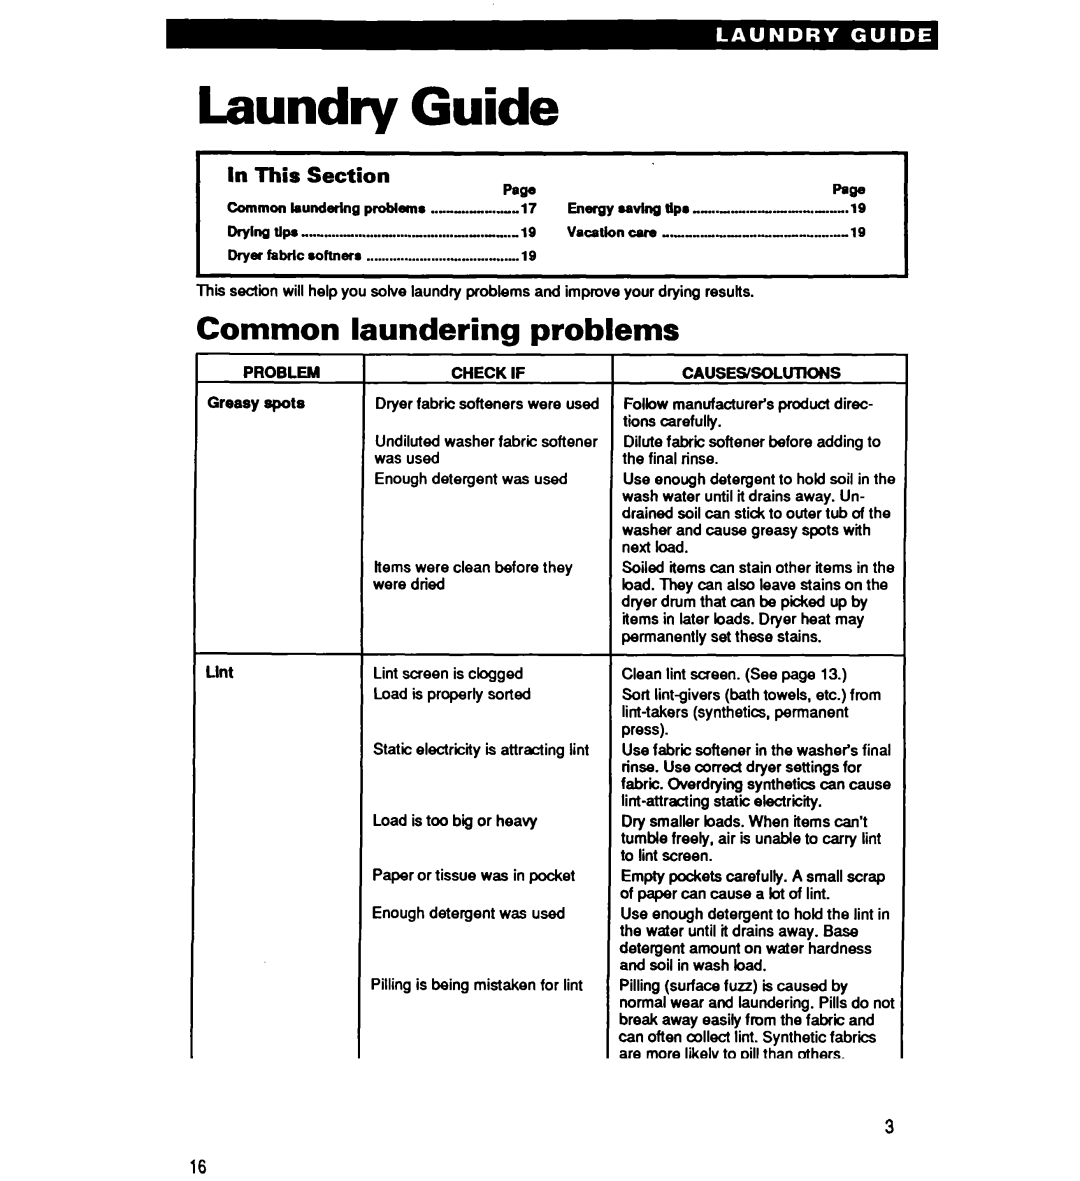 Whirlpool EL5030V, GL5030, GL4030V, GL6050V, EL6050V, EL4030V Laundry Guide, Common laundering problems, This Section Paw 